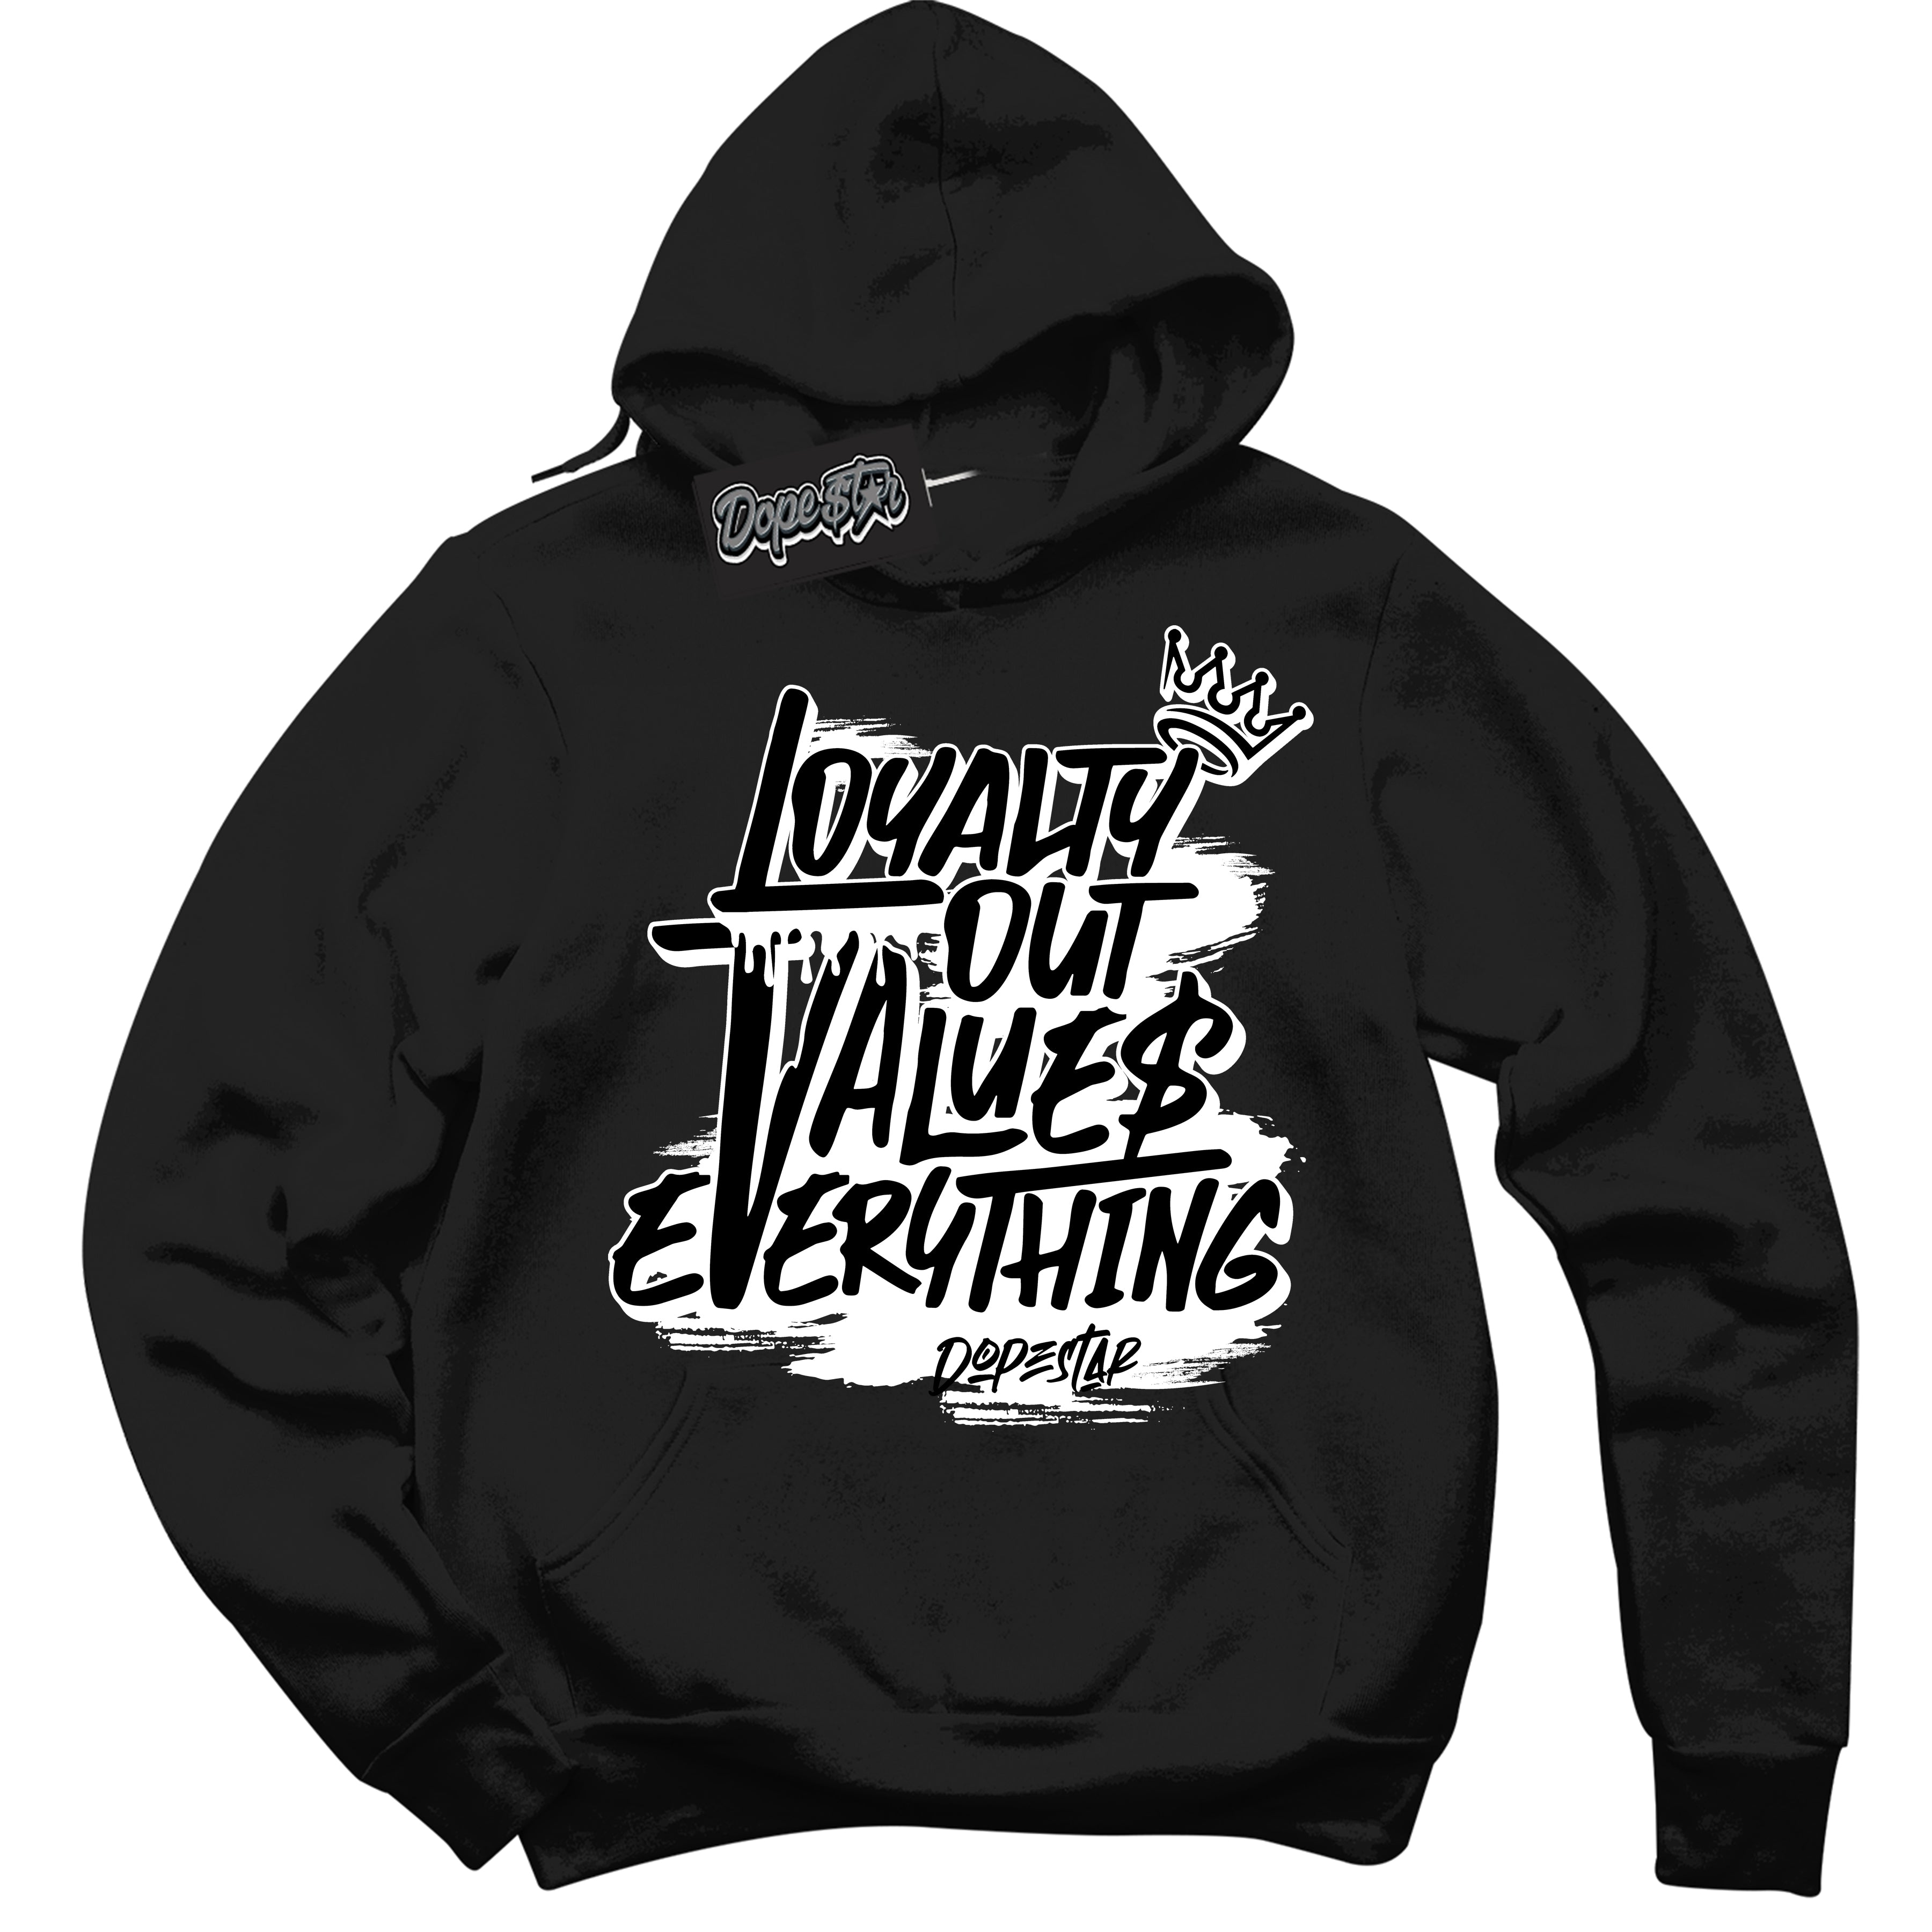 Cool Black Hoodie with “ Loyalty Out Values Everything ”  design that Perfectly Matches  SP Travis Scott Black Phantom 1s Sneakers.